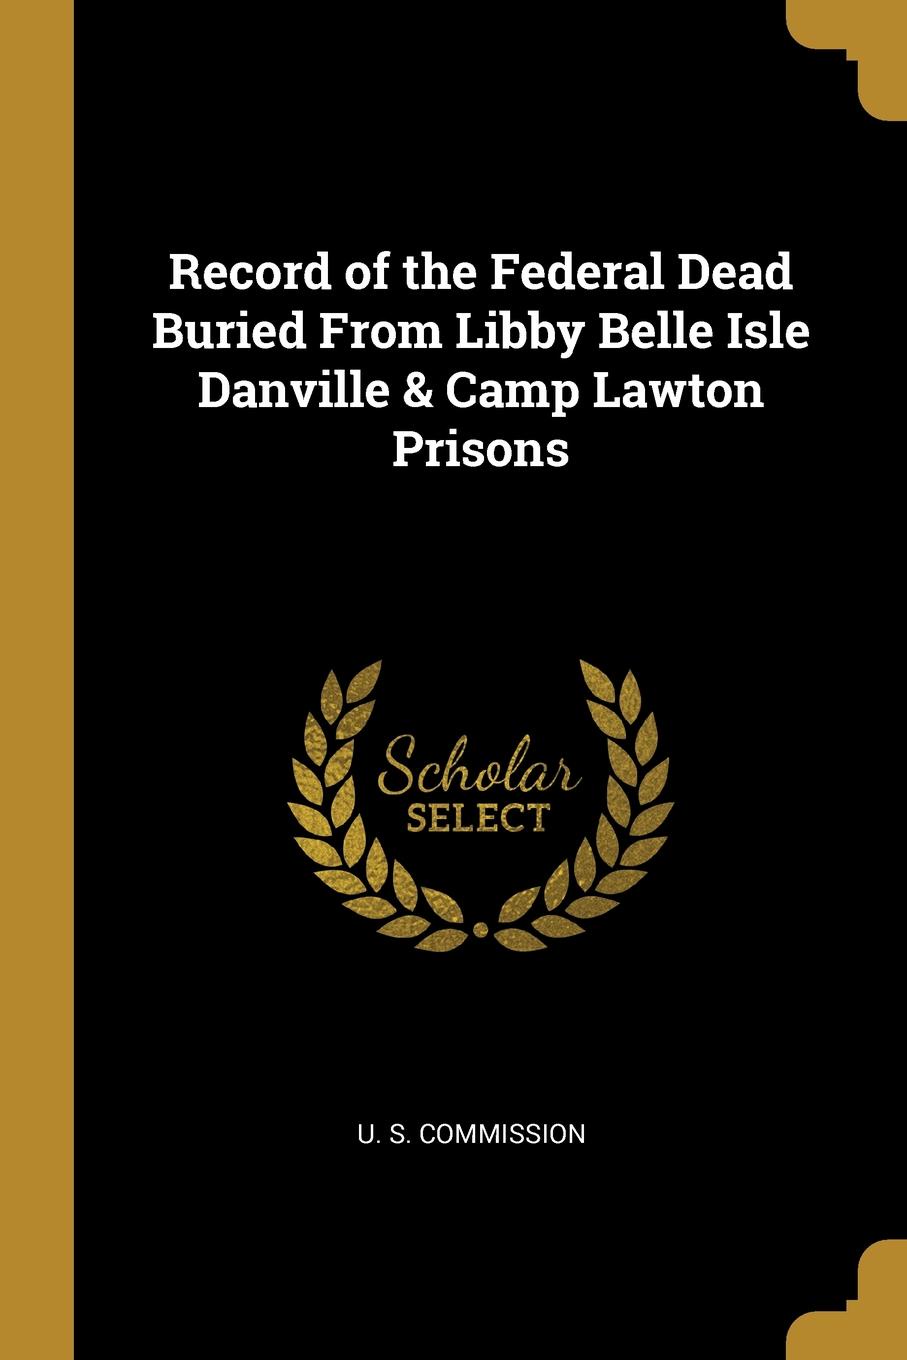 Record of the Federal Dead Buried From Libby Belle Isle Danville . Camp Lawton Prisons